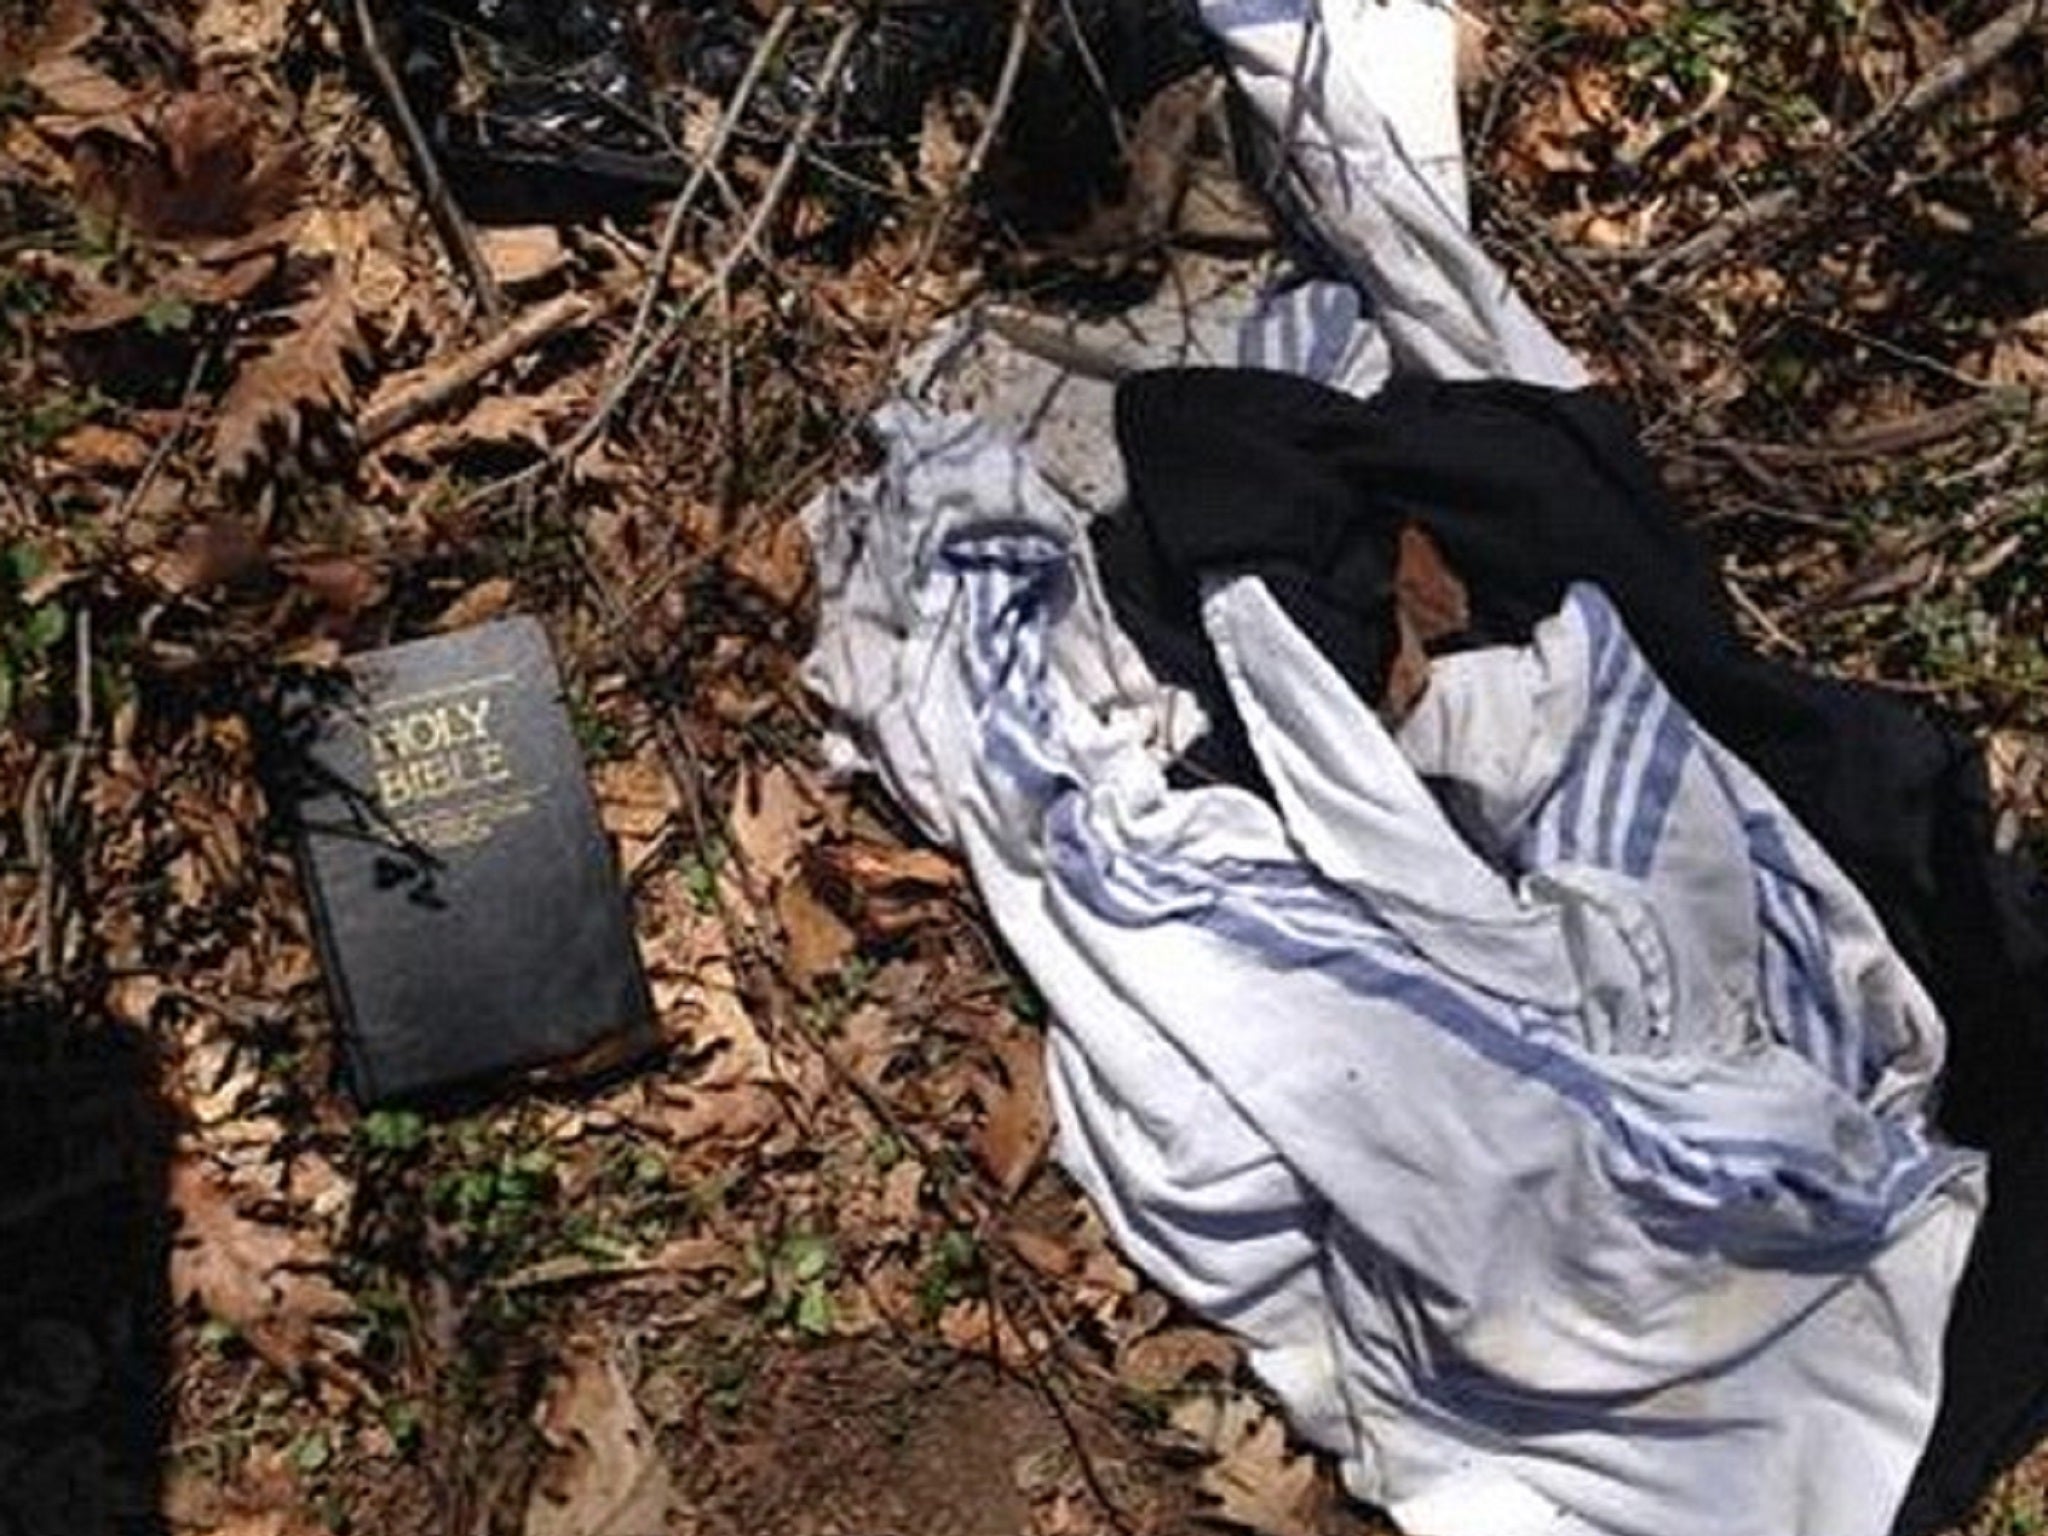 The Bible and blanket that was found next to the 21-year-old allegedly abandoned man